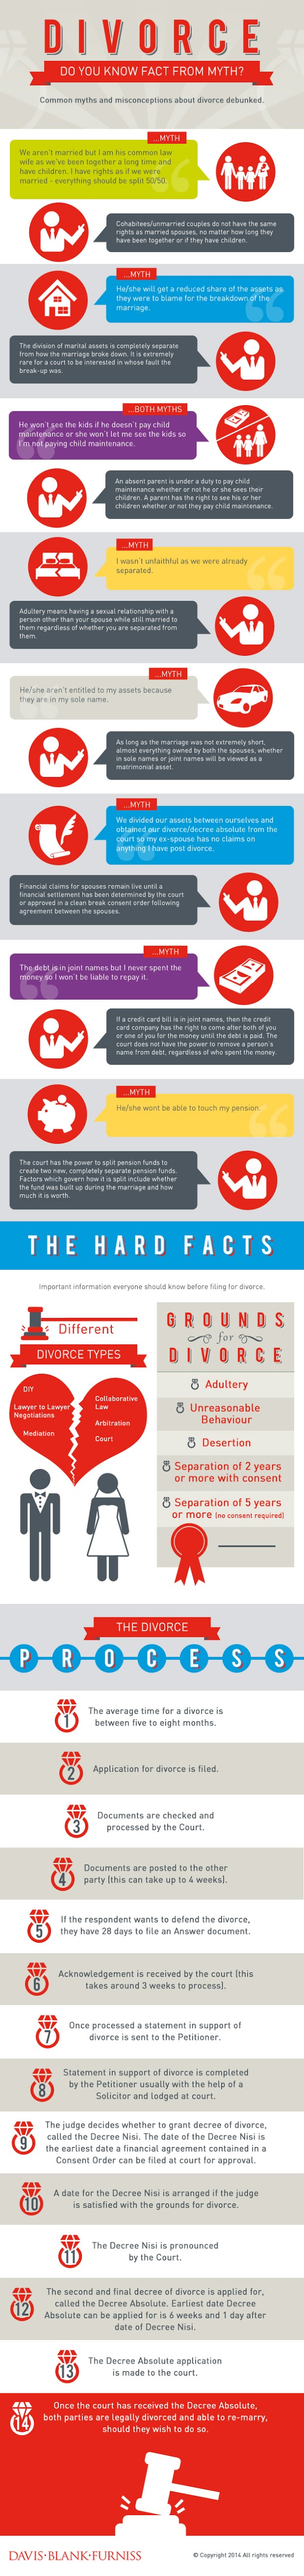 Divorce - Do you know fact from myth? #infographic